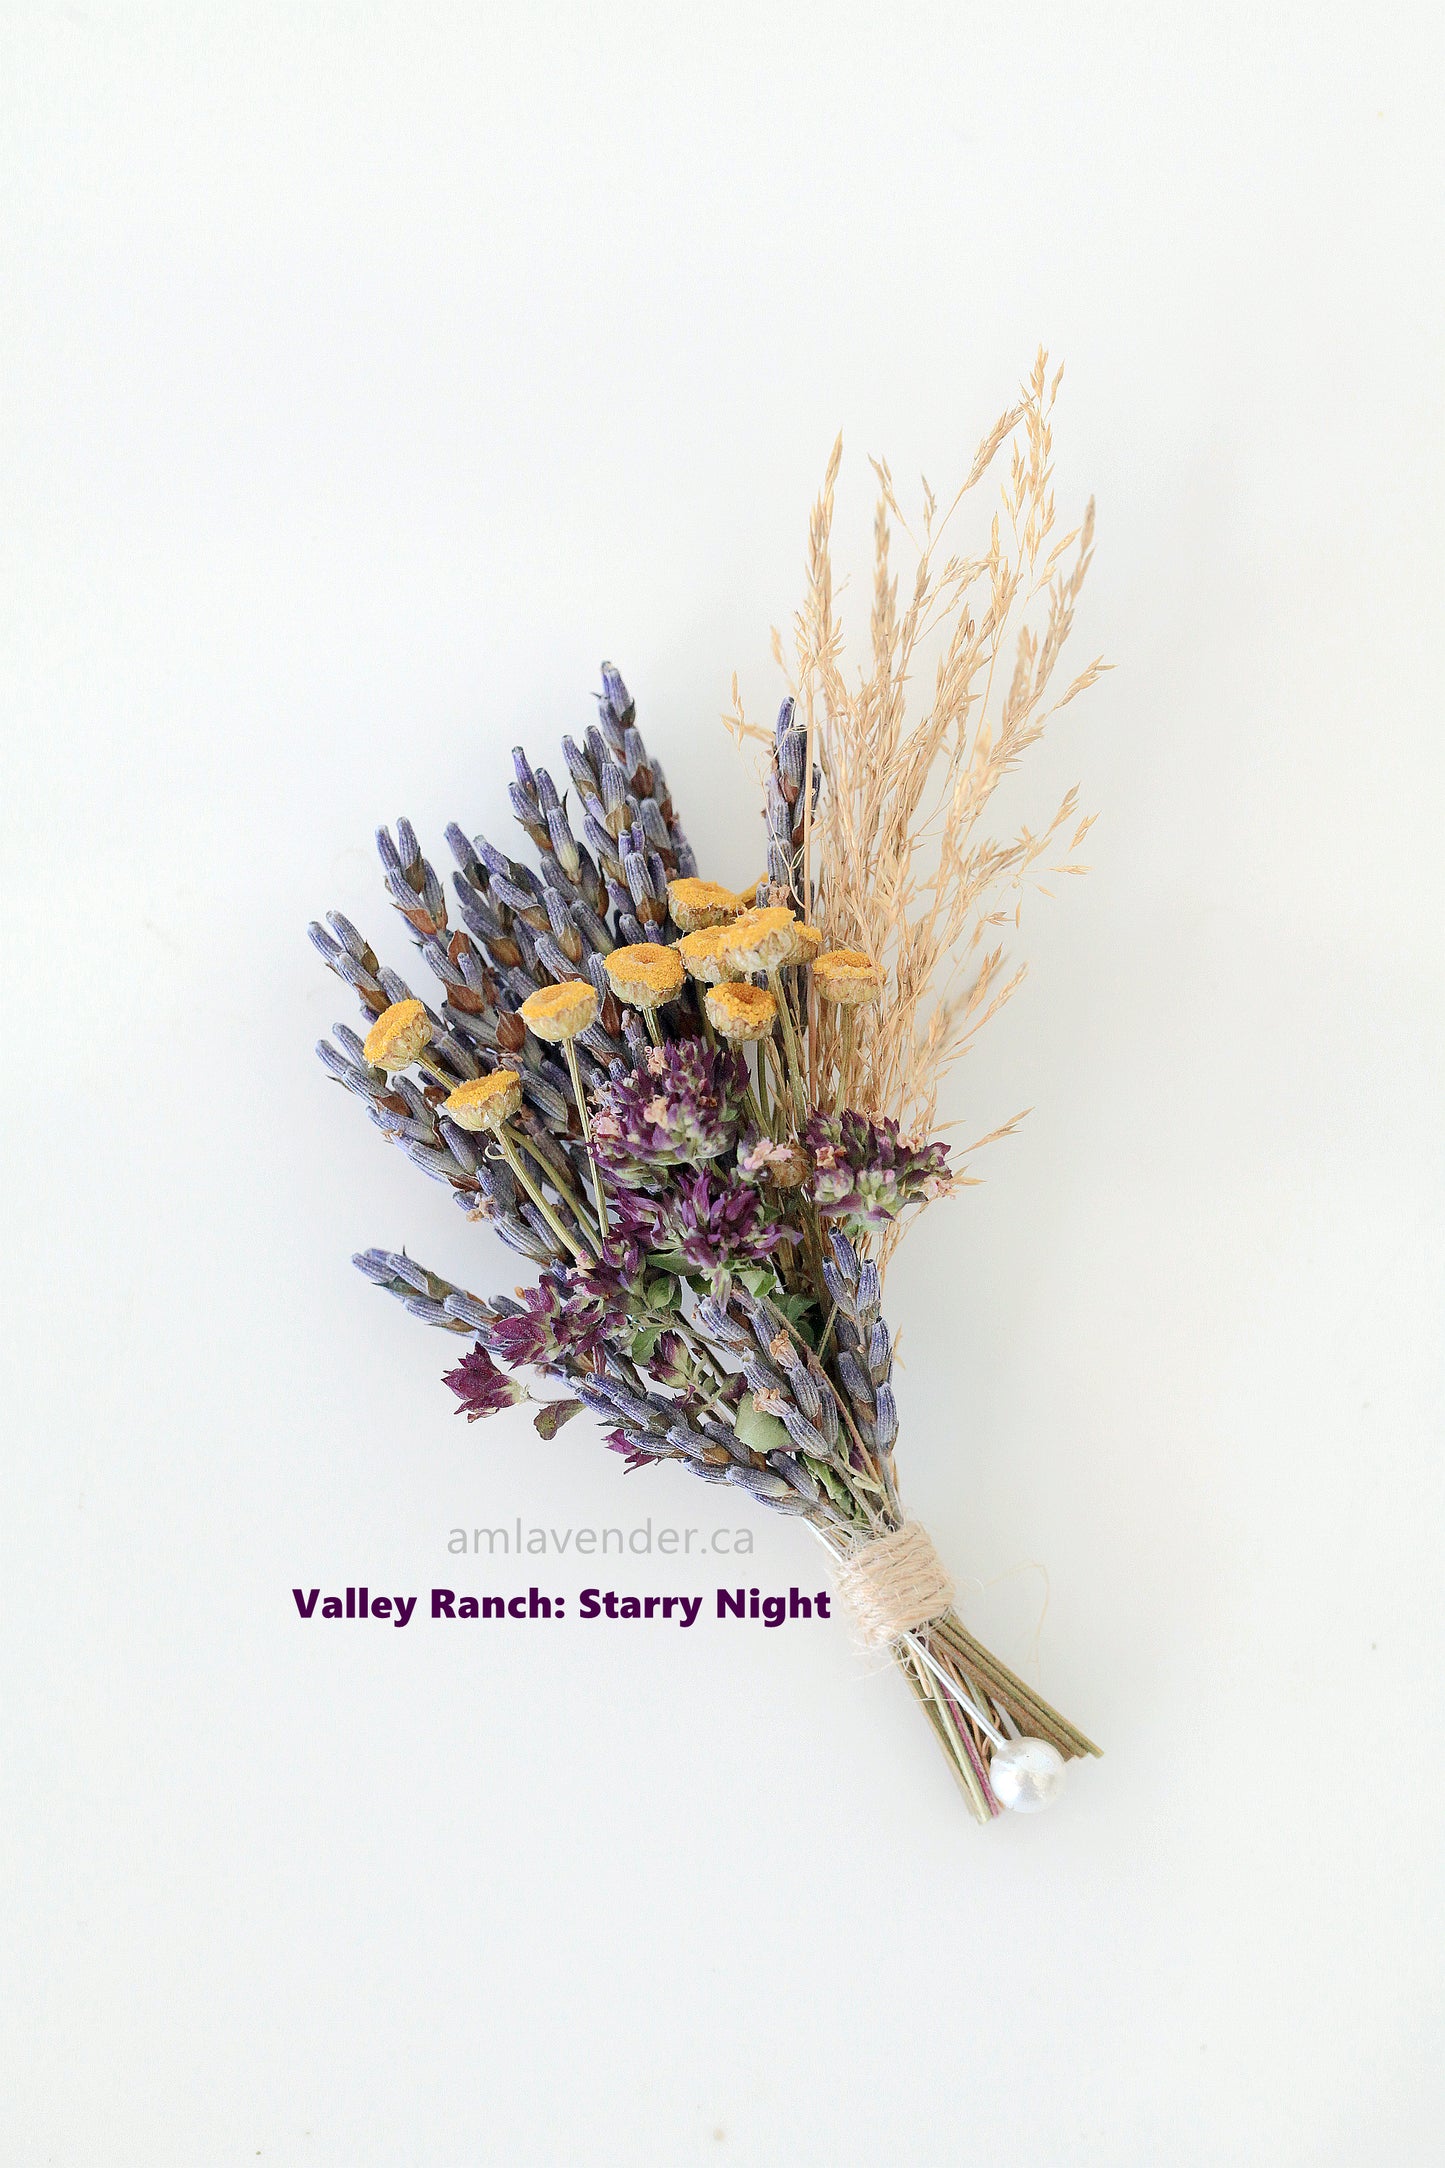 Bouquet - Valley Ranch - Starry Night | AM Lavender